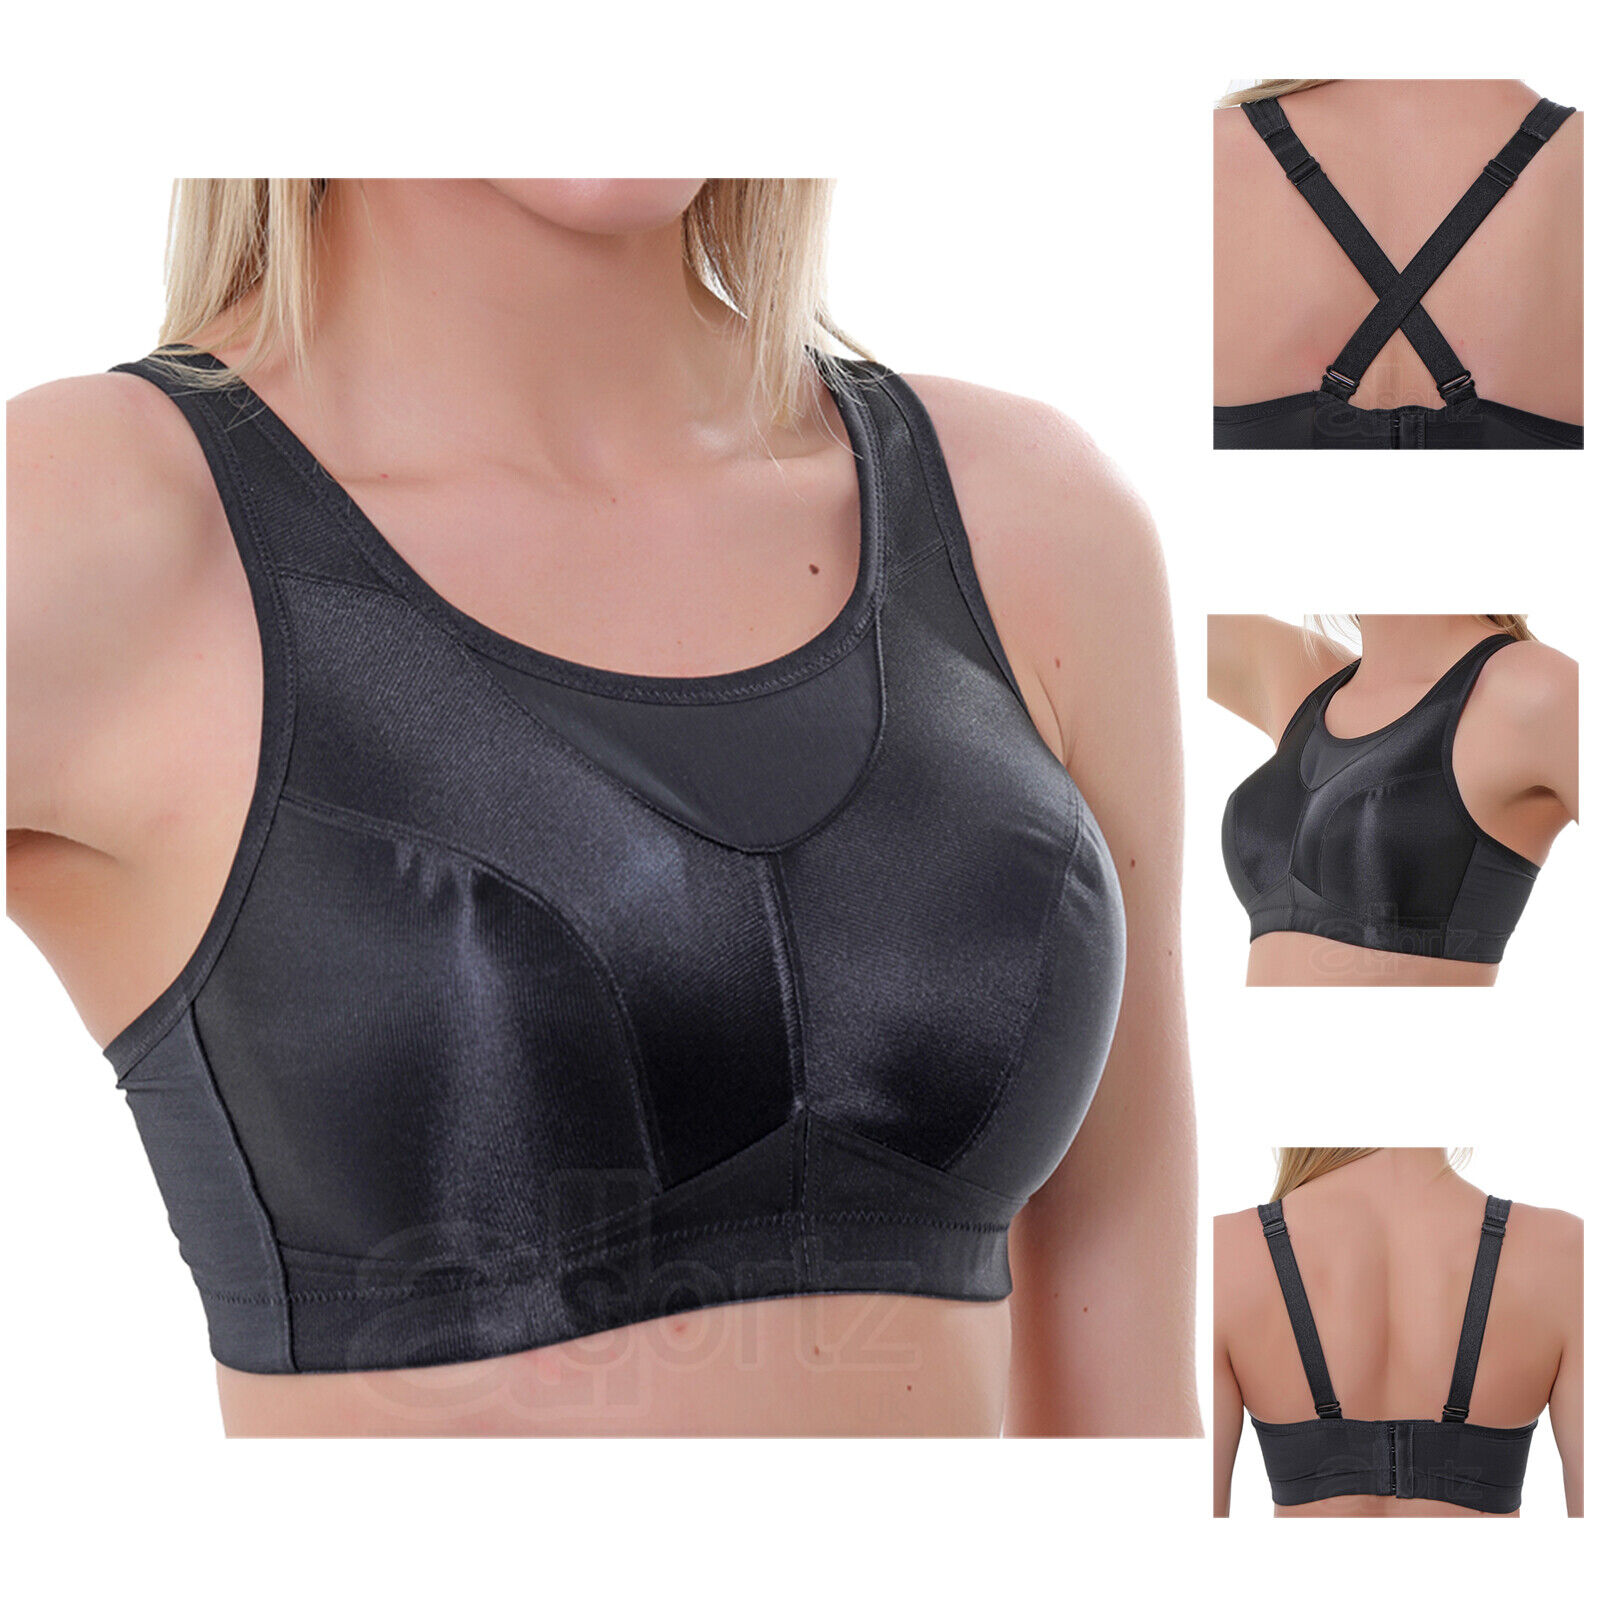 Ladies Black High Impact Firm Support Multiway Crossover Sports Bra UK Sizes New